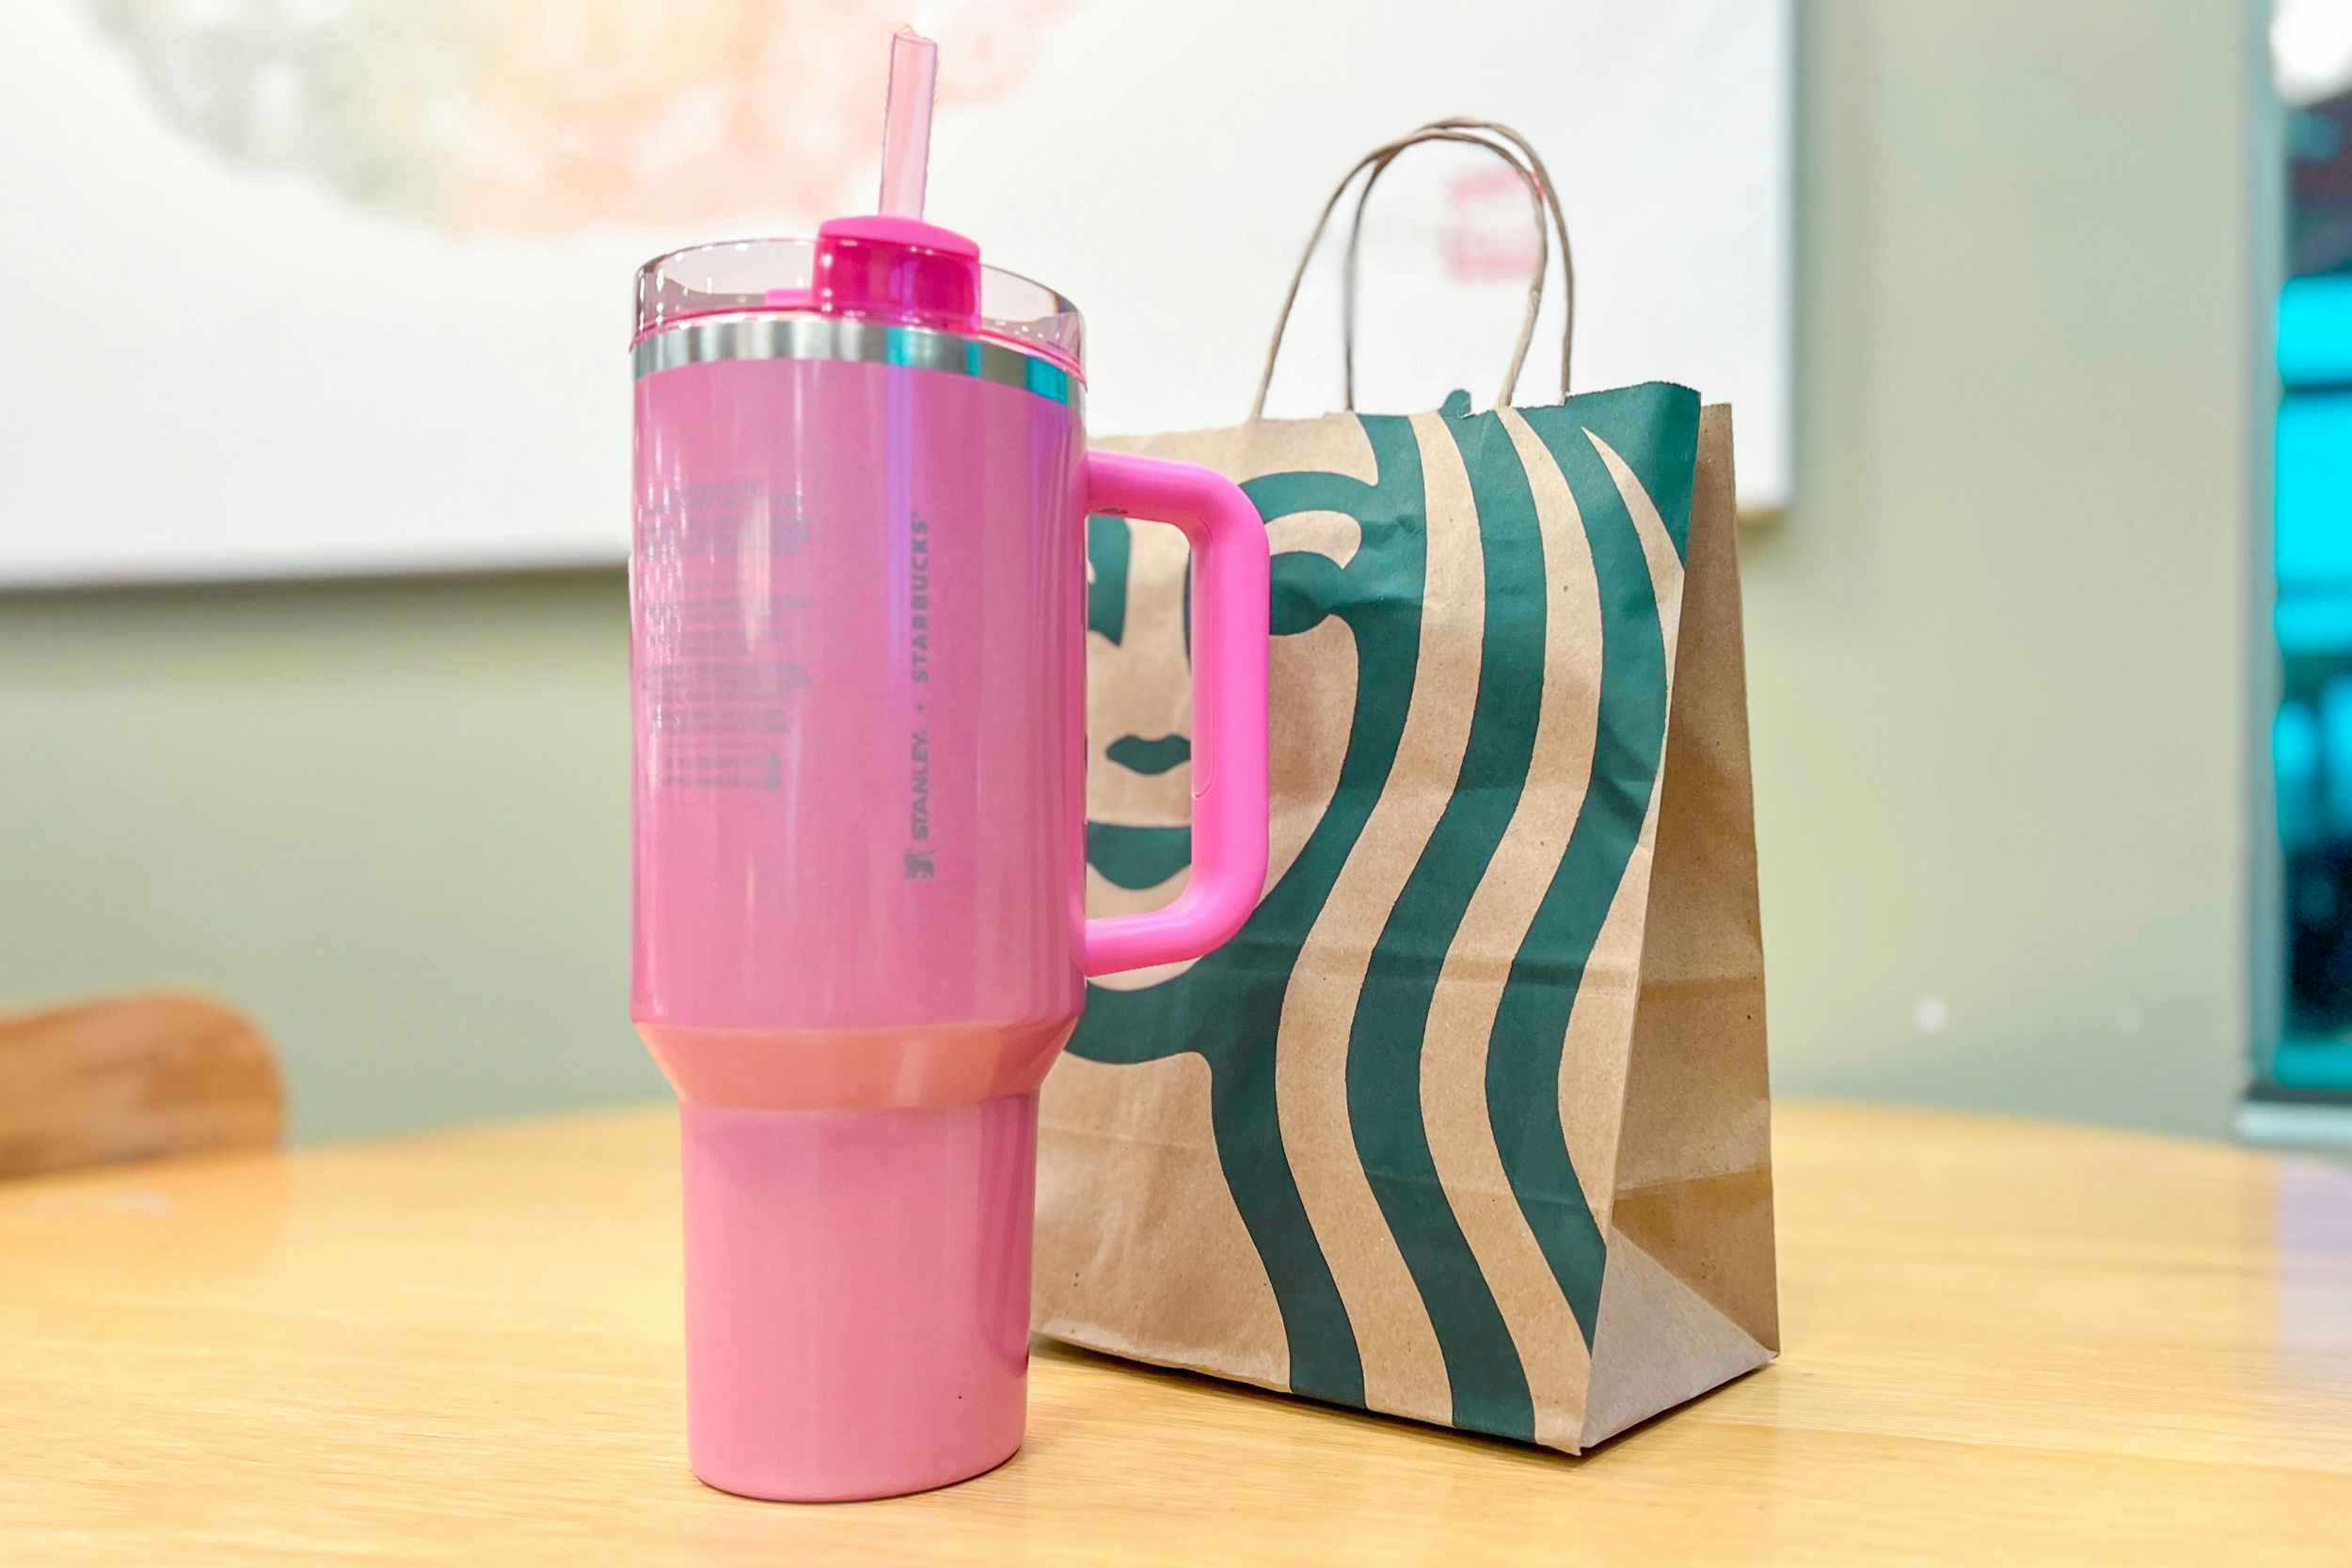 https://prod-cdn-thekrazycouponlady.imgix.net/wp-content/uploads/2023/04/stanley-starbucks-hot-pink-adventure-quencher-tumbler-kcl-2-1704292008-1704292008.jpg?auto=format&fit=fill&q=25